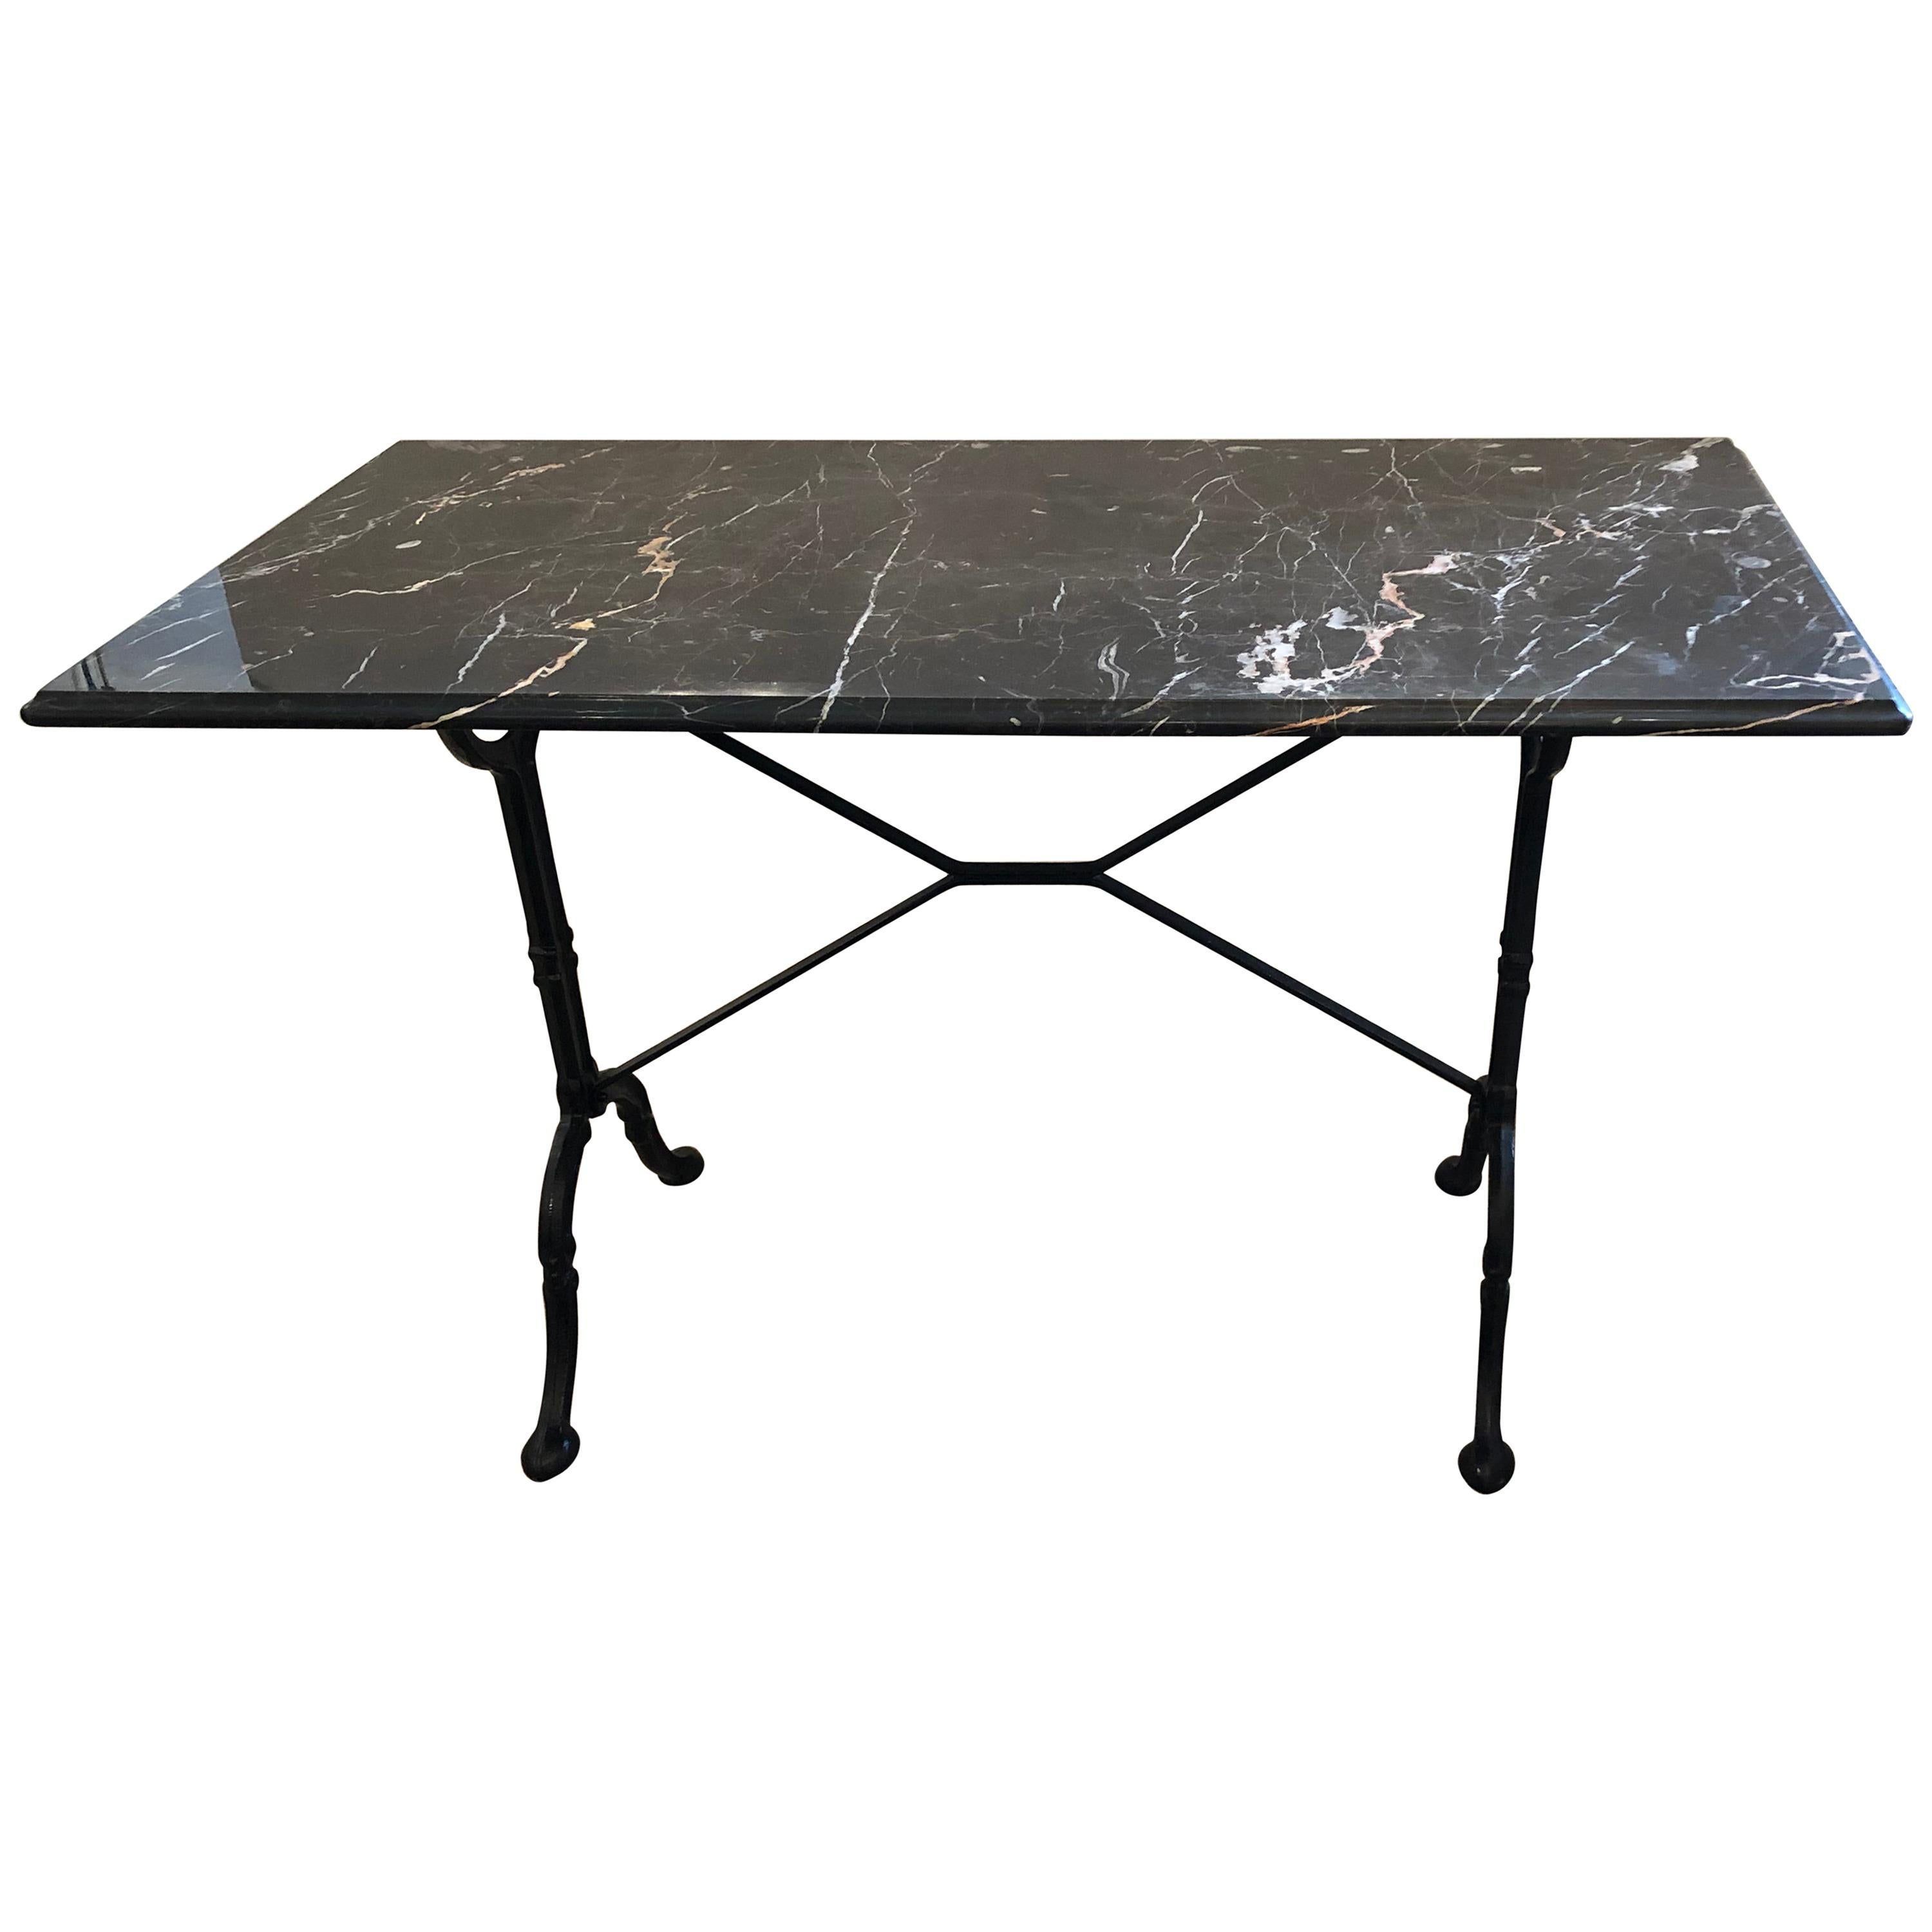 Sleek Black and White Marble and Wrought Iron Console Writing Table Desk